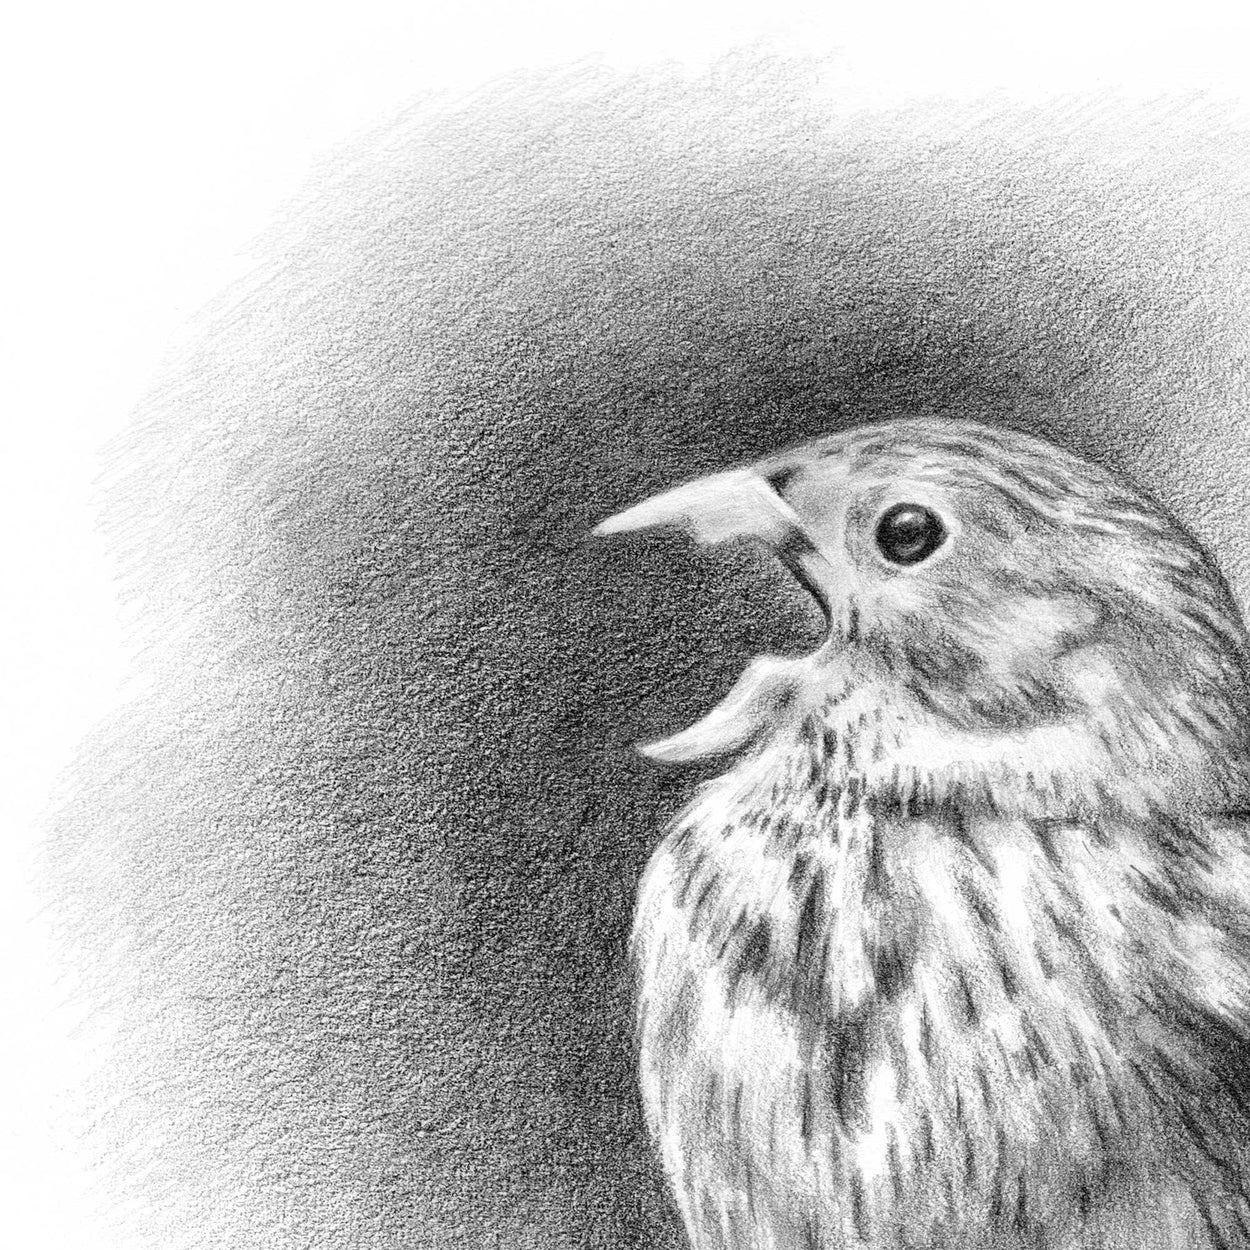 Close-up details of the head and chest of a pencil drawing of a small bird singing